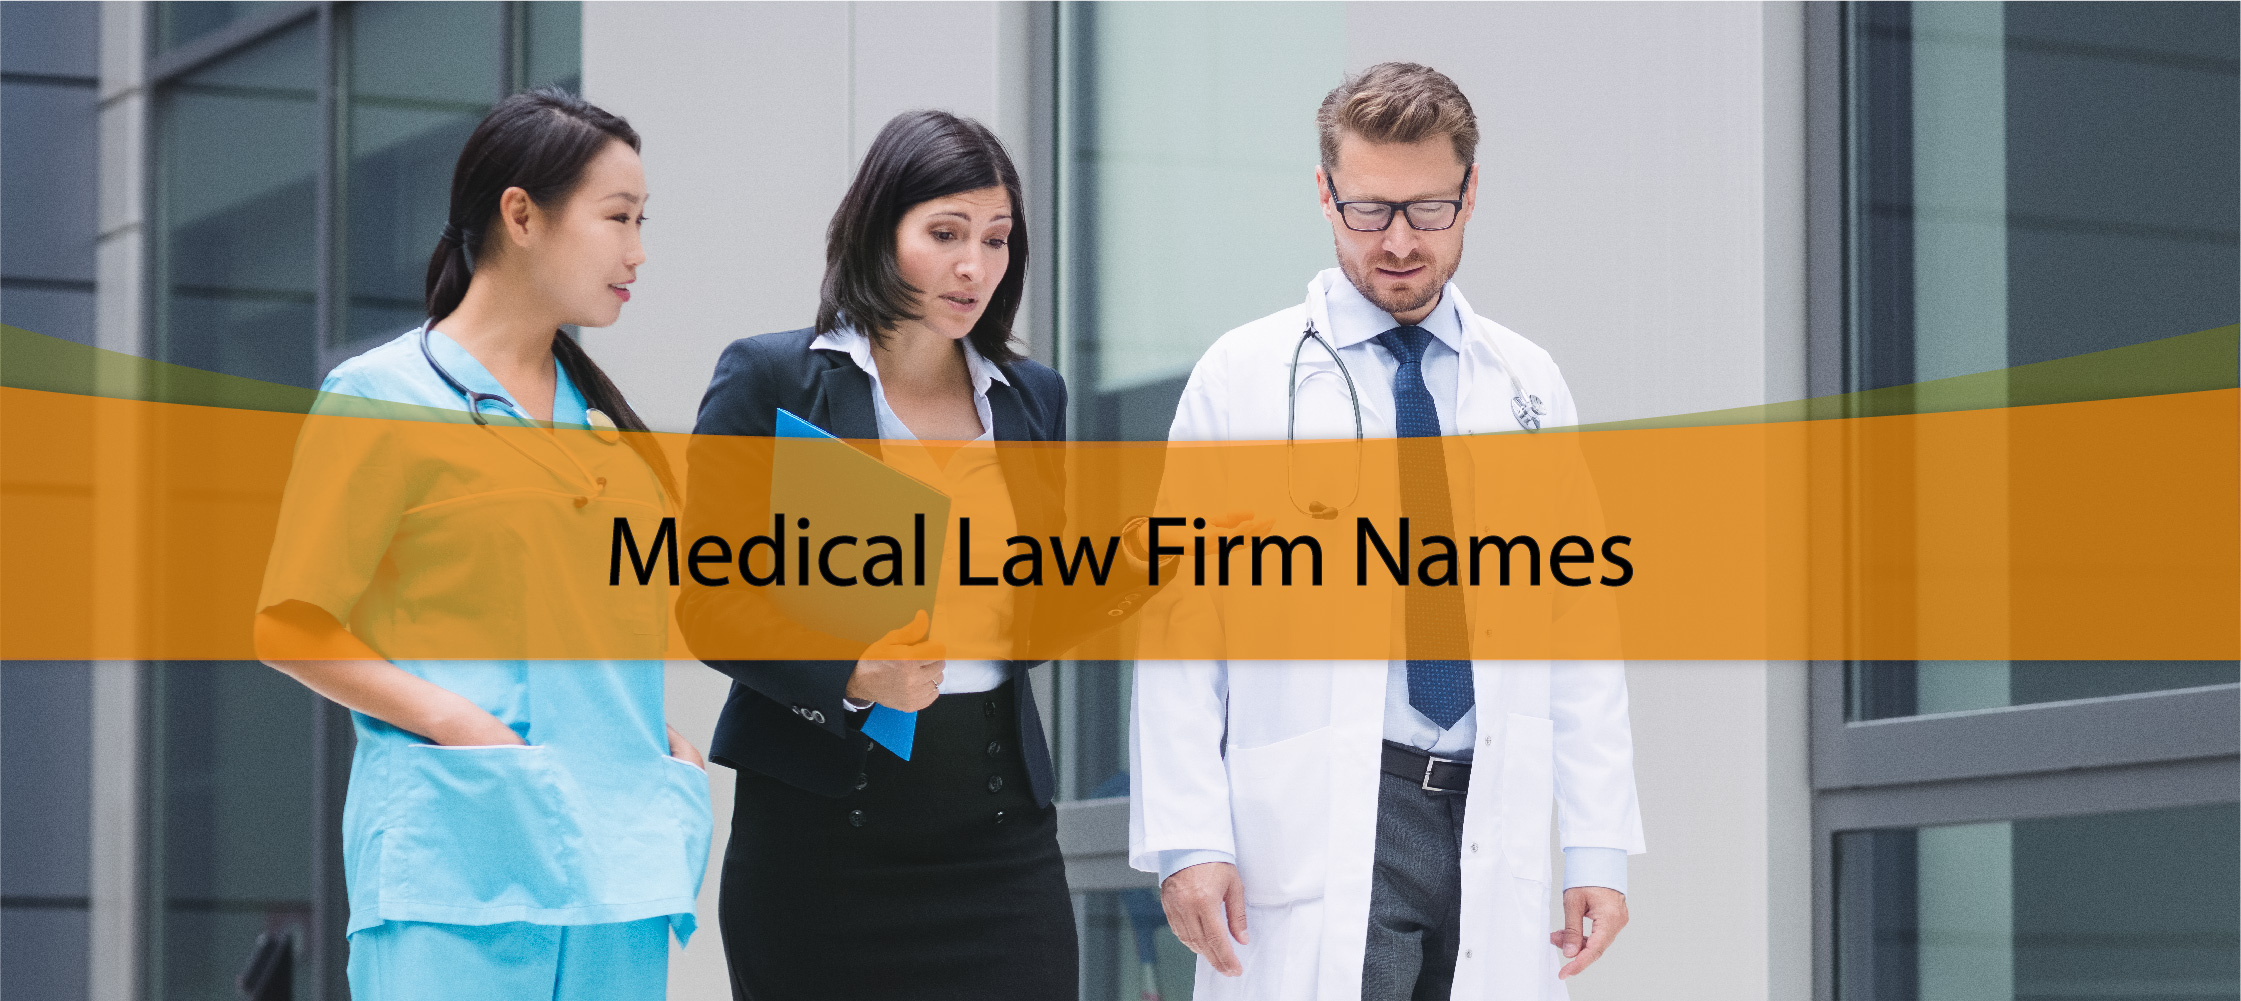 Medical Law Firm Names